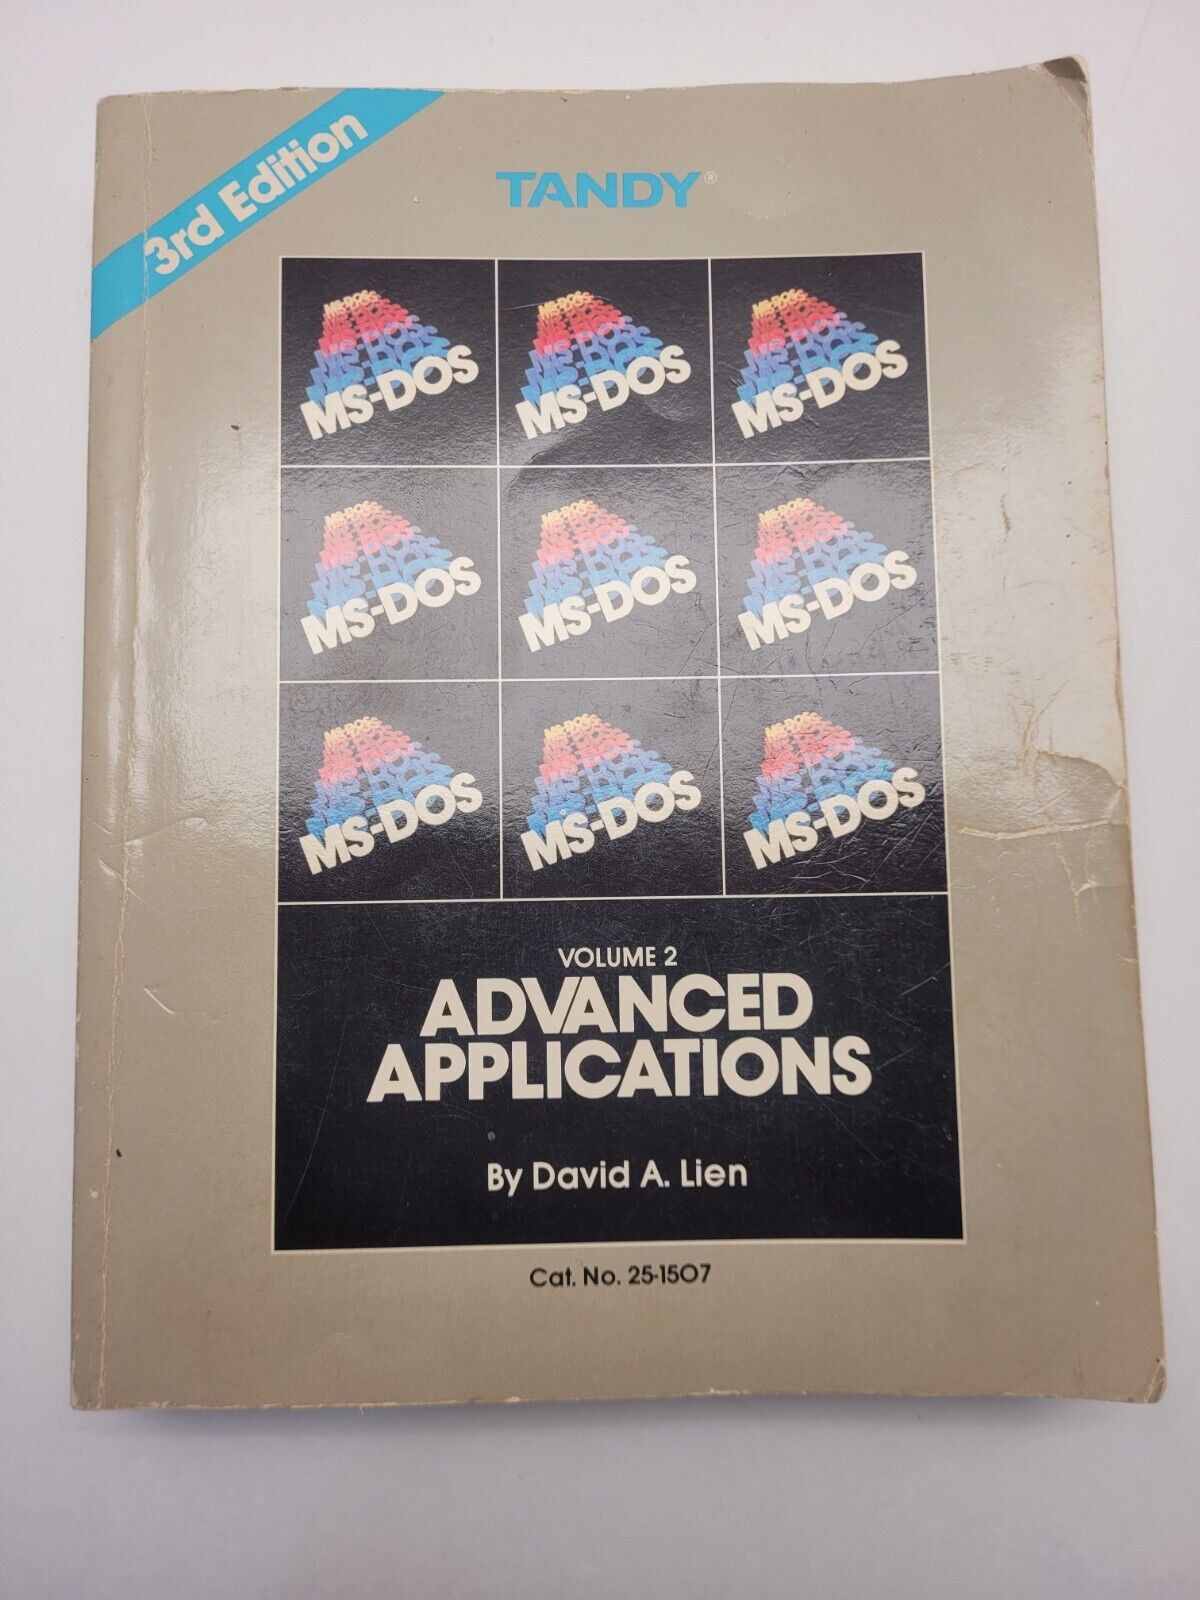 Tandy MS-DOS Volume 2 Advance Applications 2nd Edition By David A. Lien